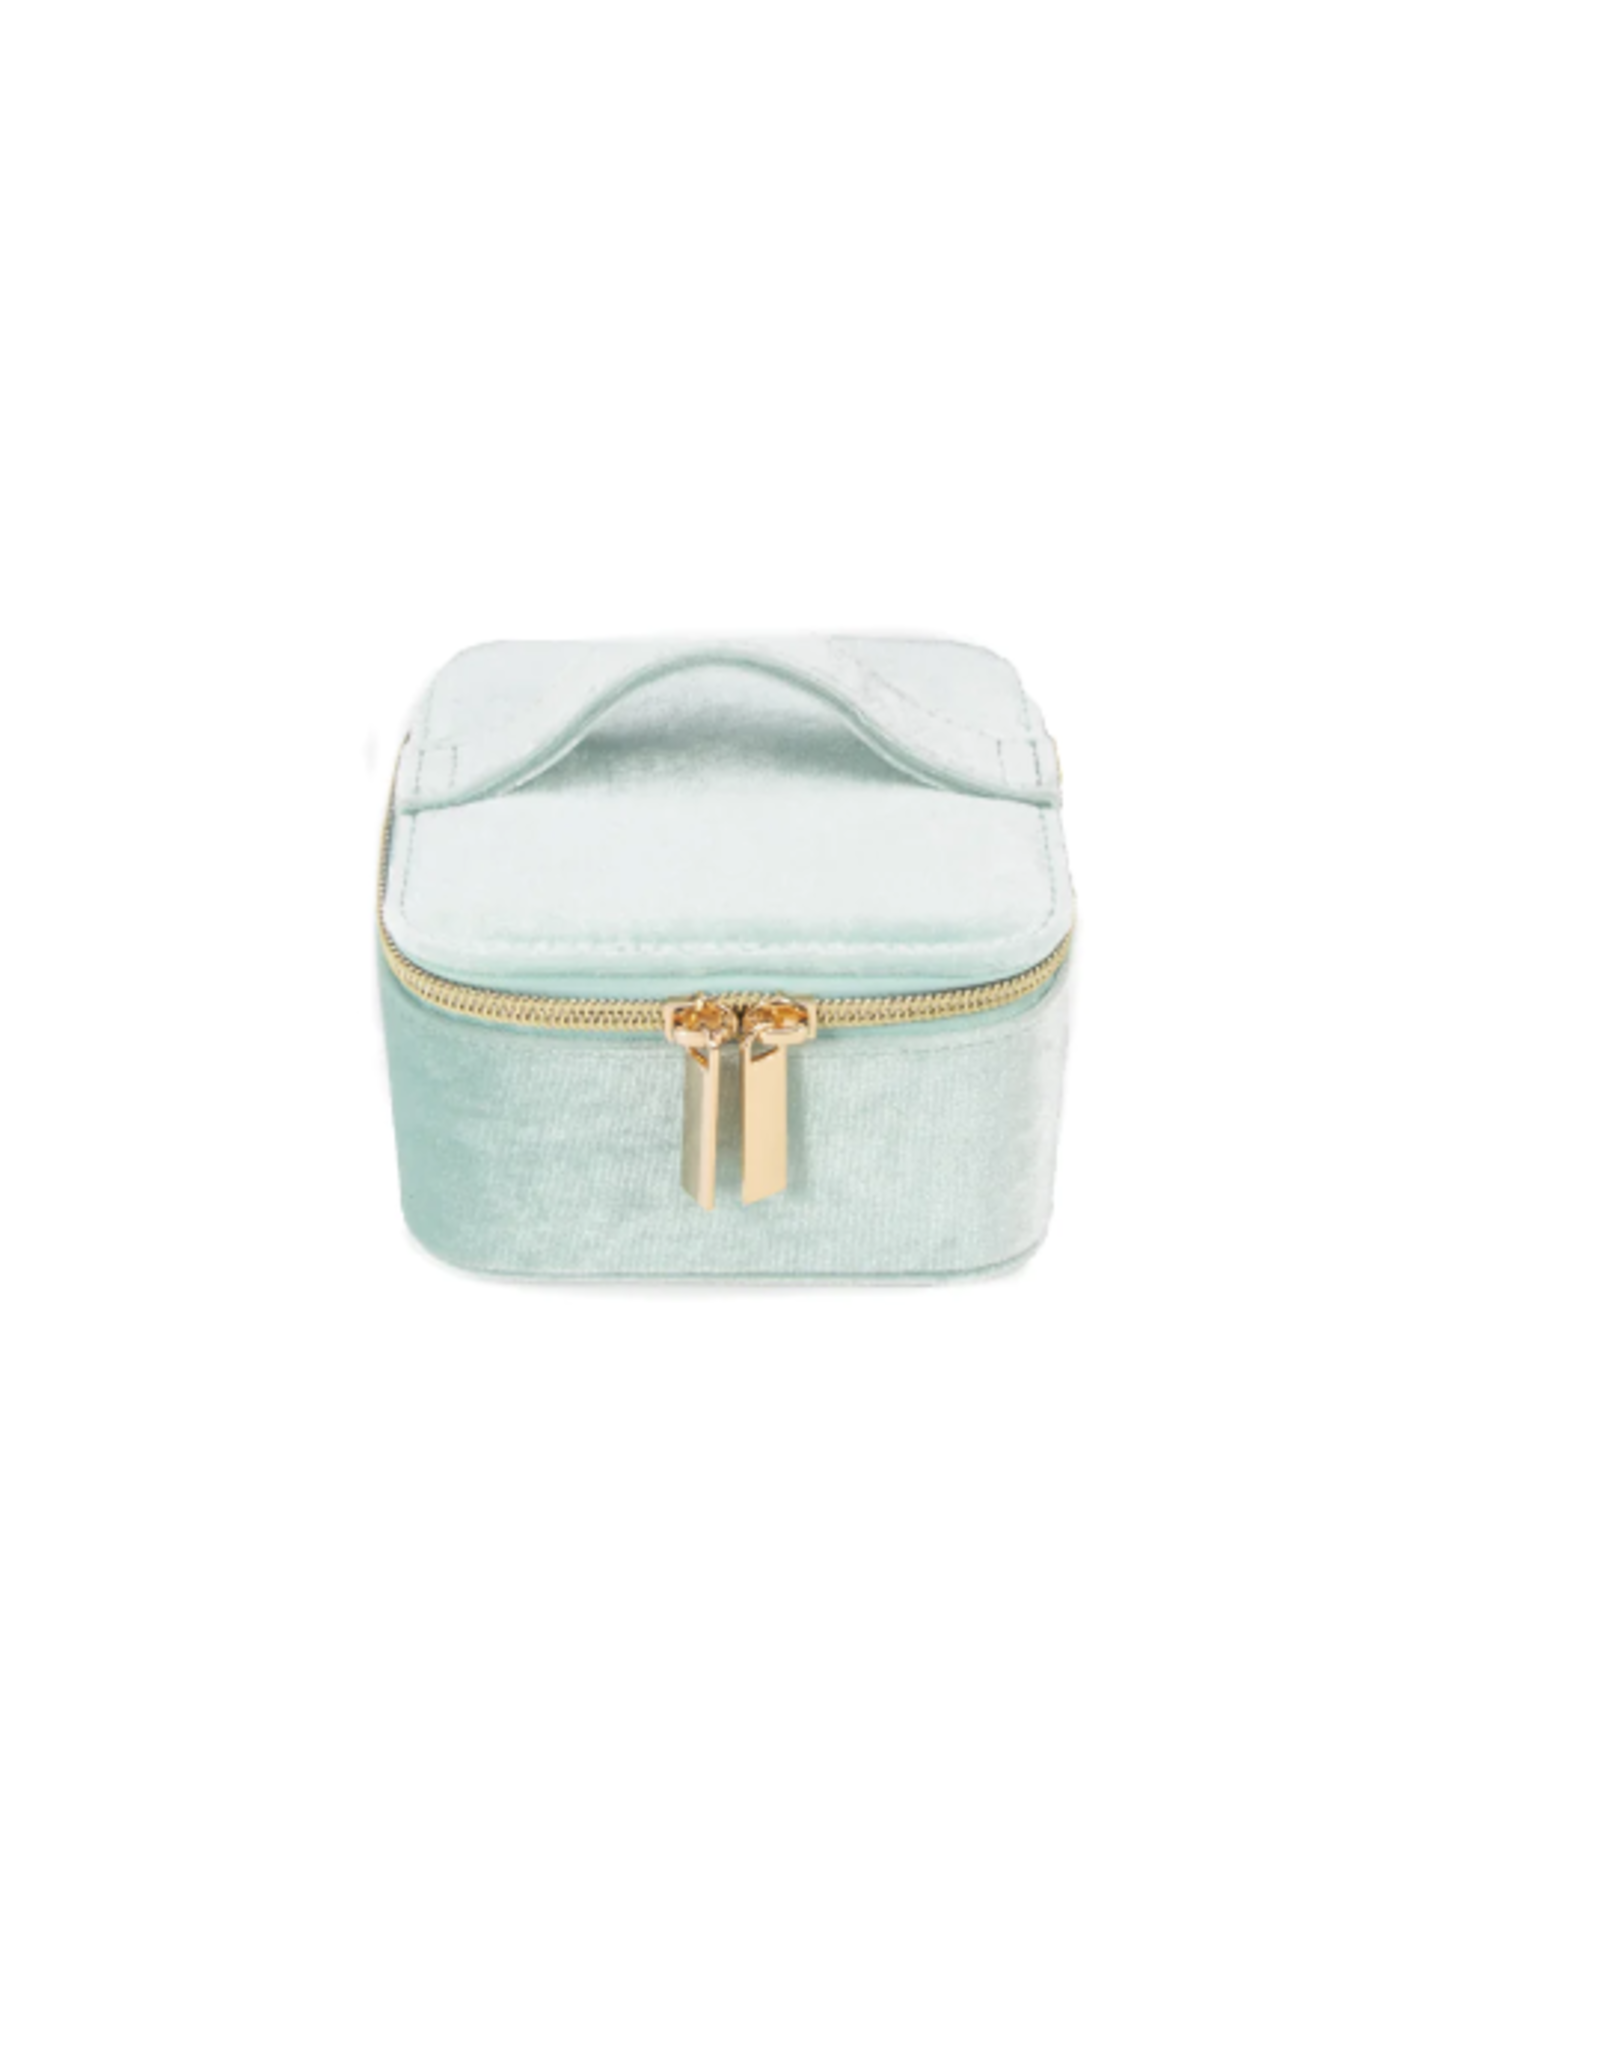 Accessories Shop at Junebug Vera Velvet Square Jewelry Case in Mint